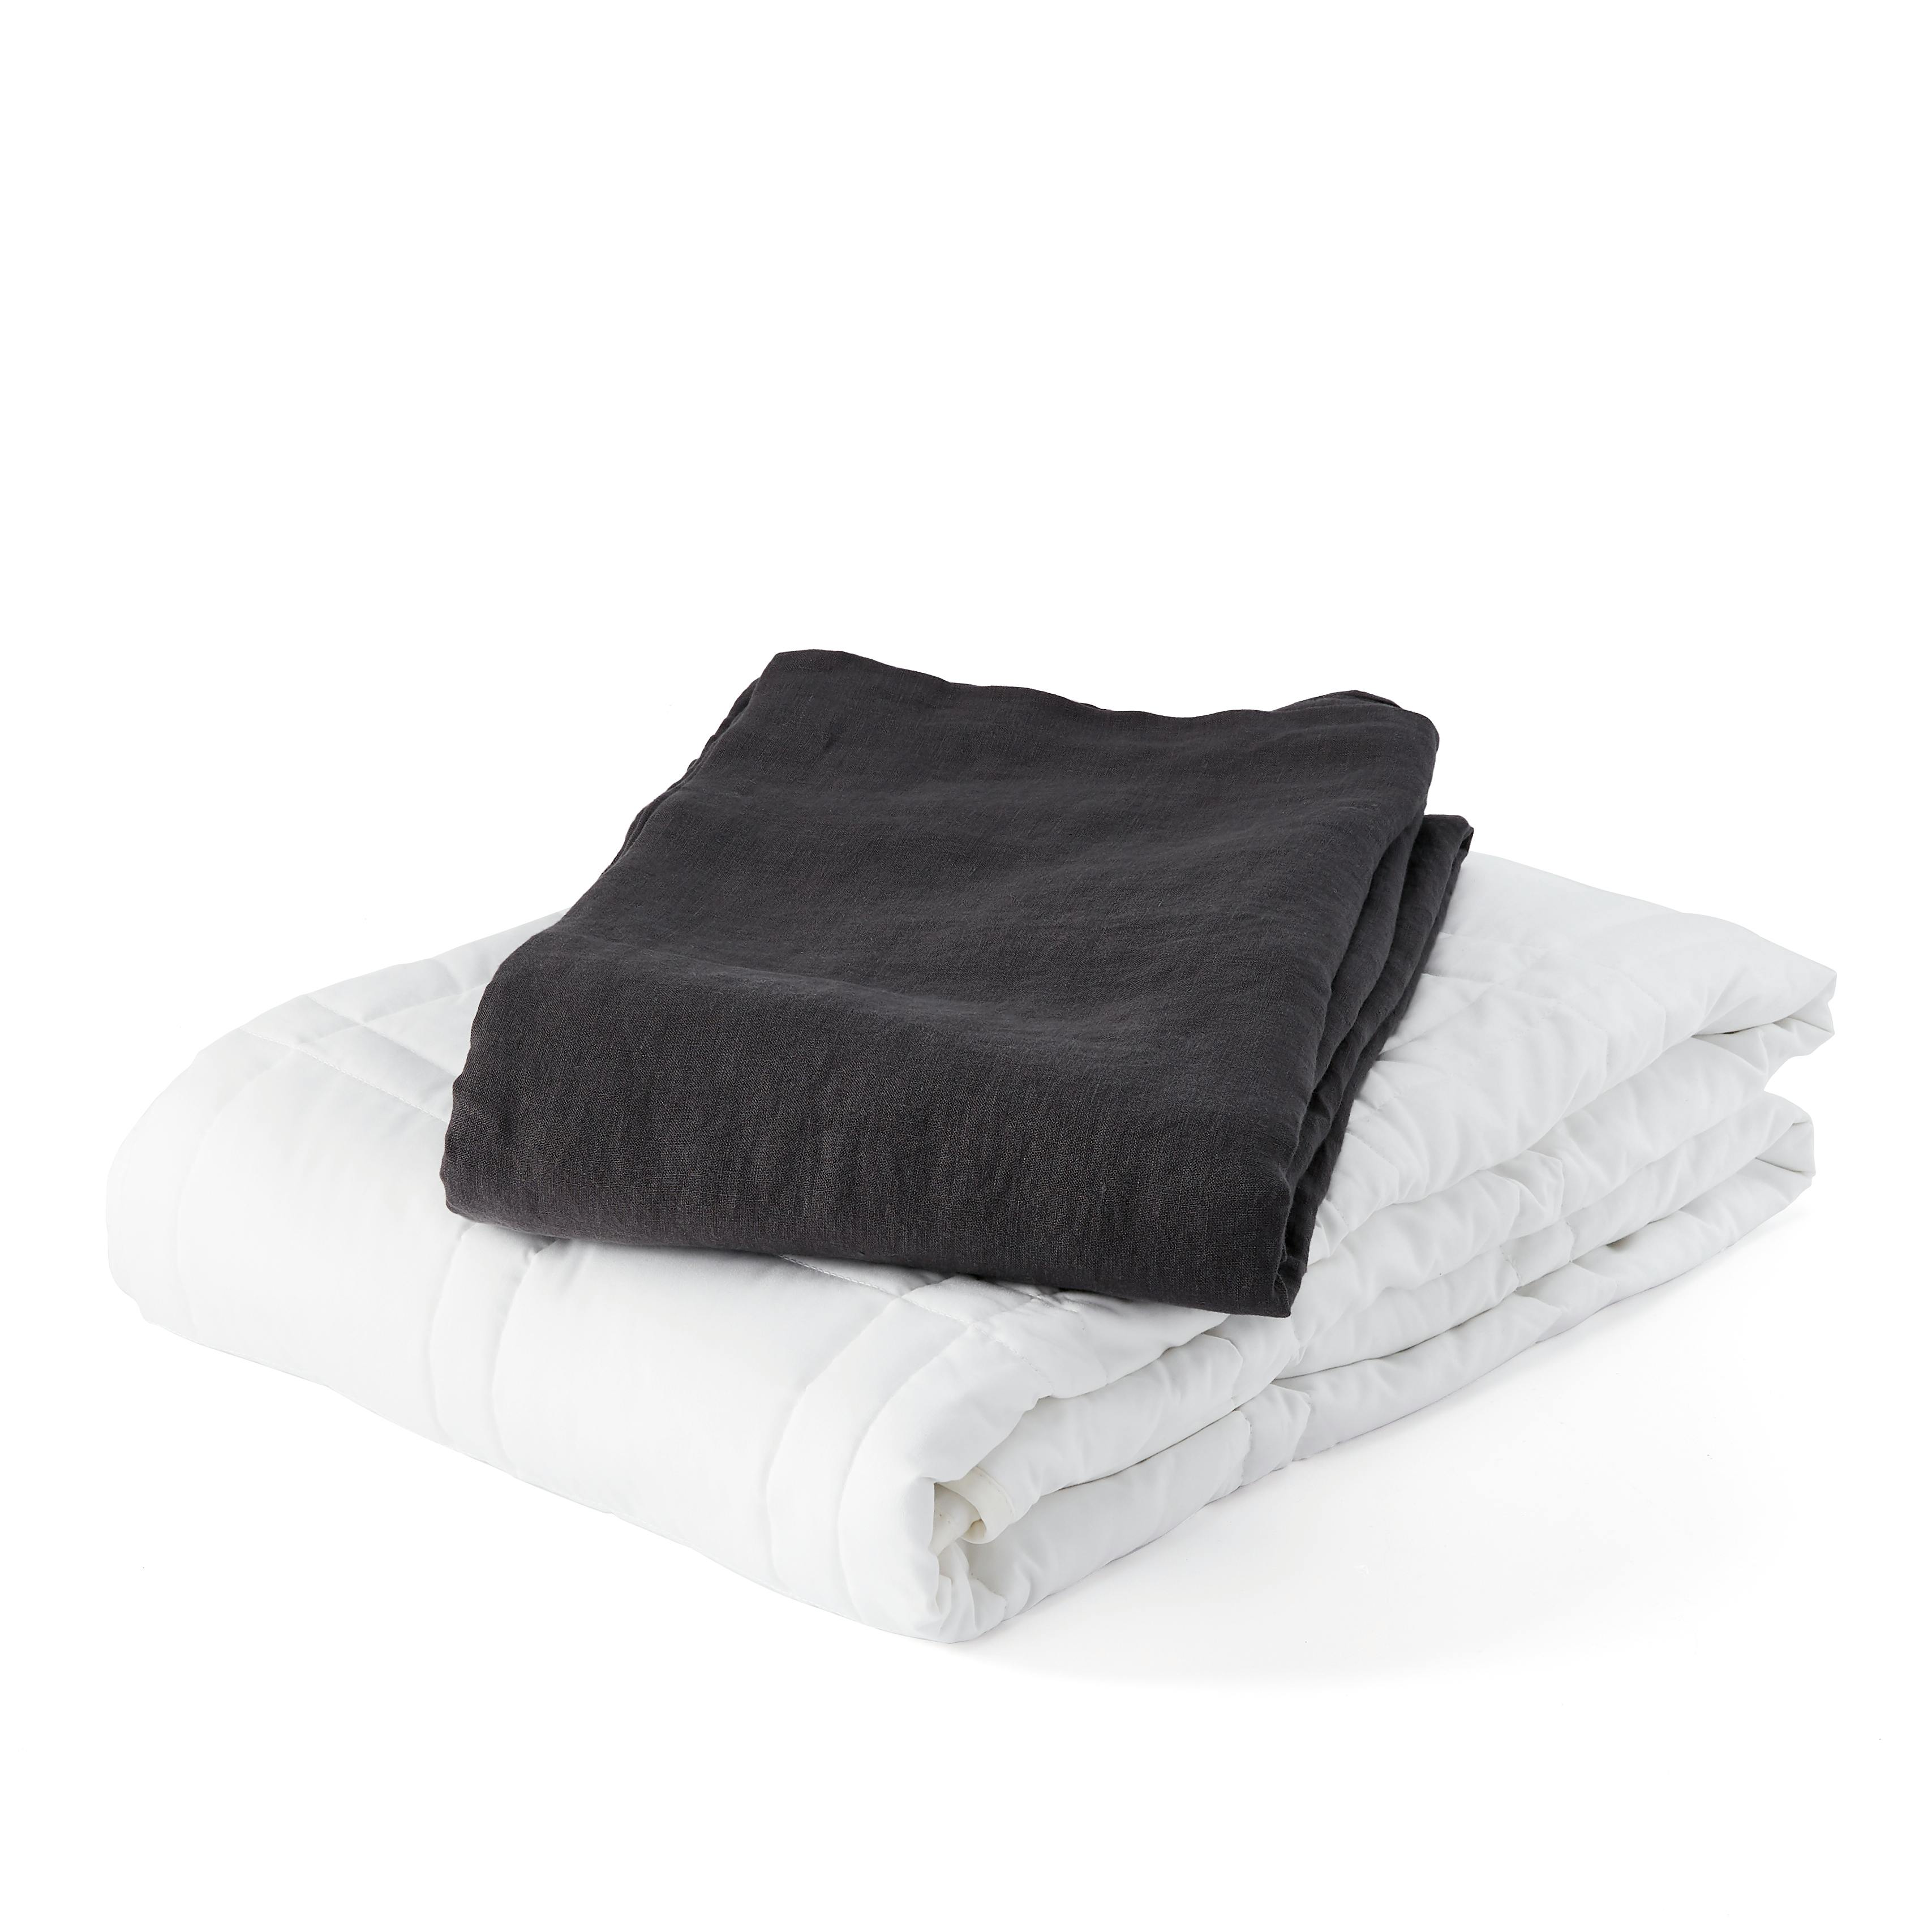 Weighted Blanket and French Linen Duvet Set